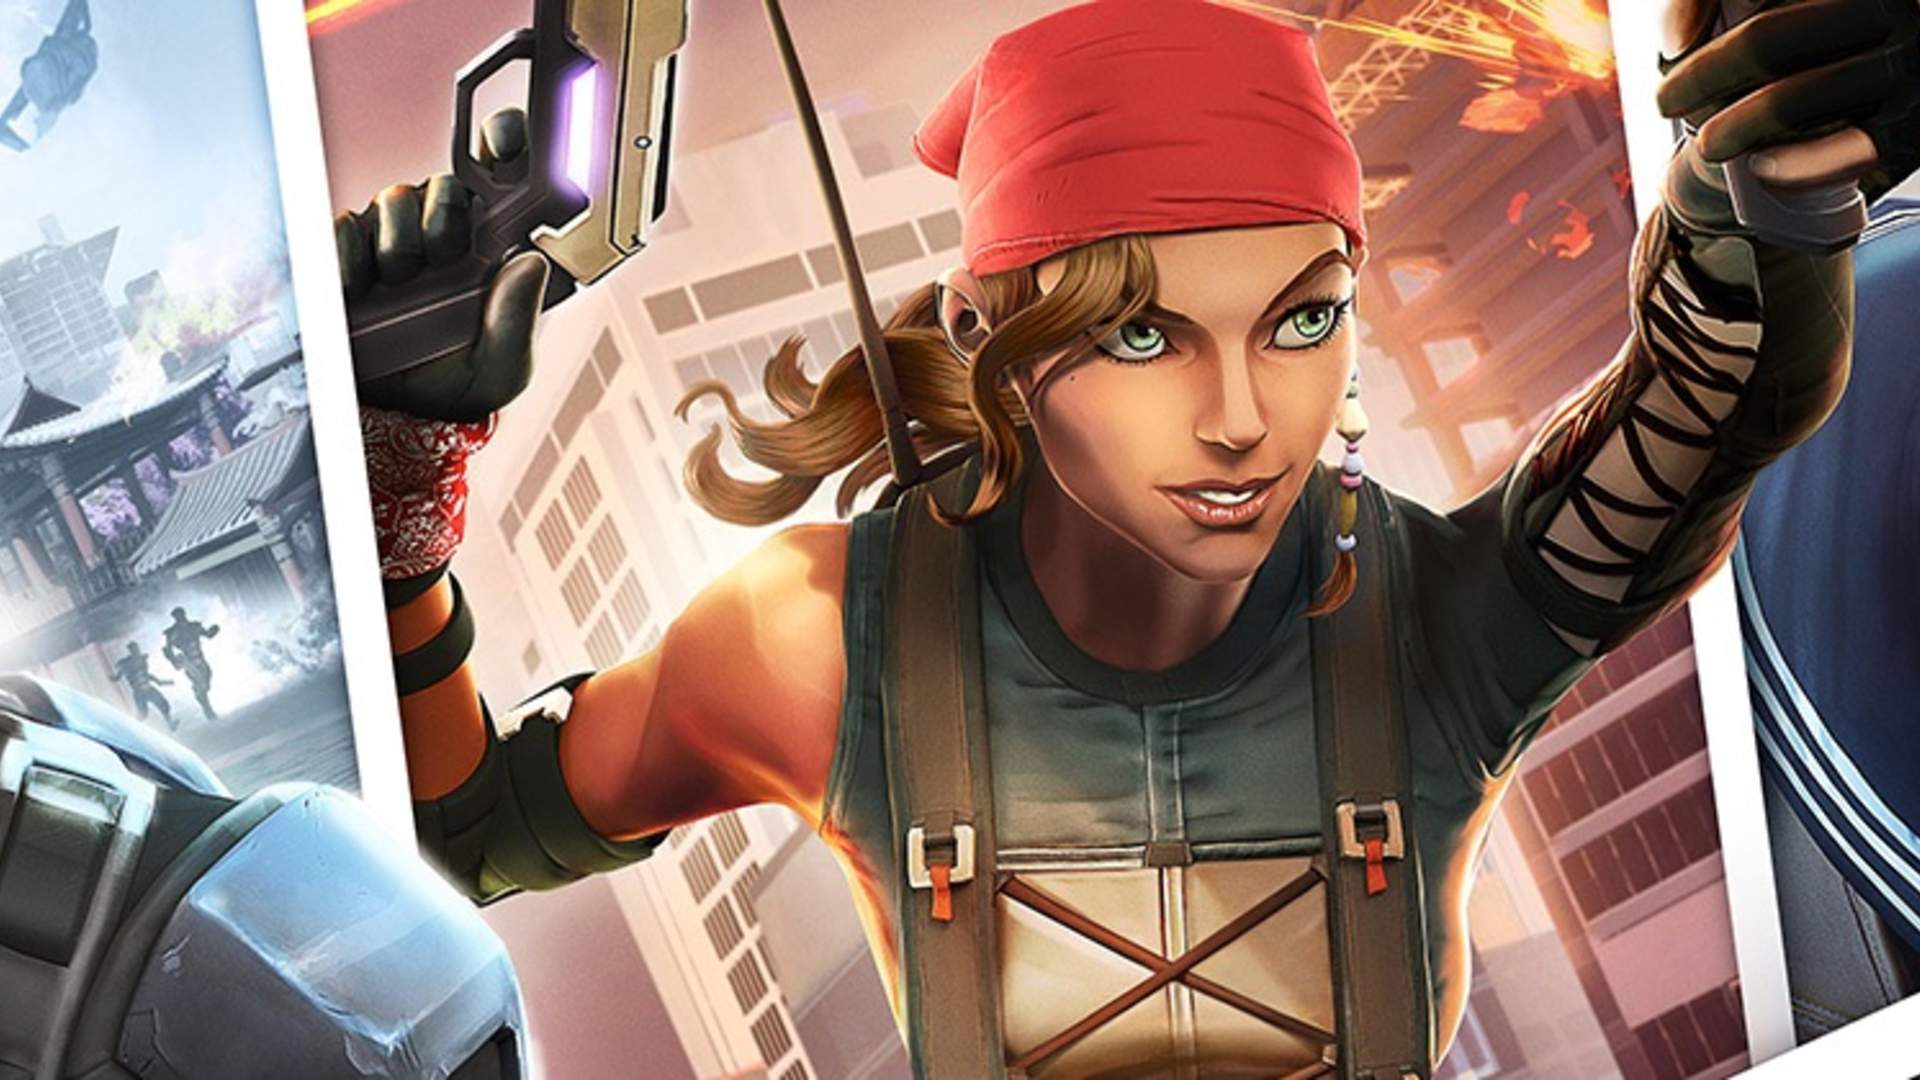 Agents of Mayhem is the G.I. Joe Game You've Been Waiting For